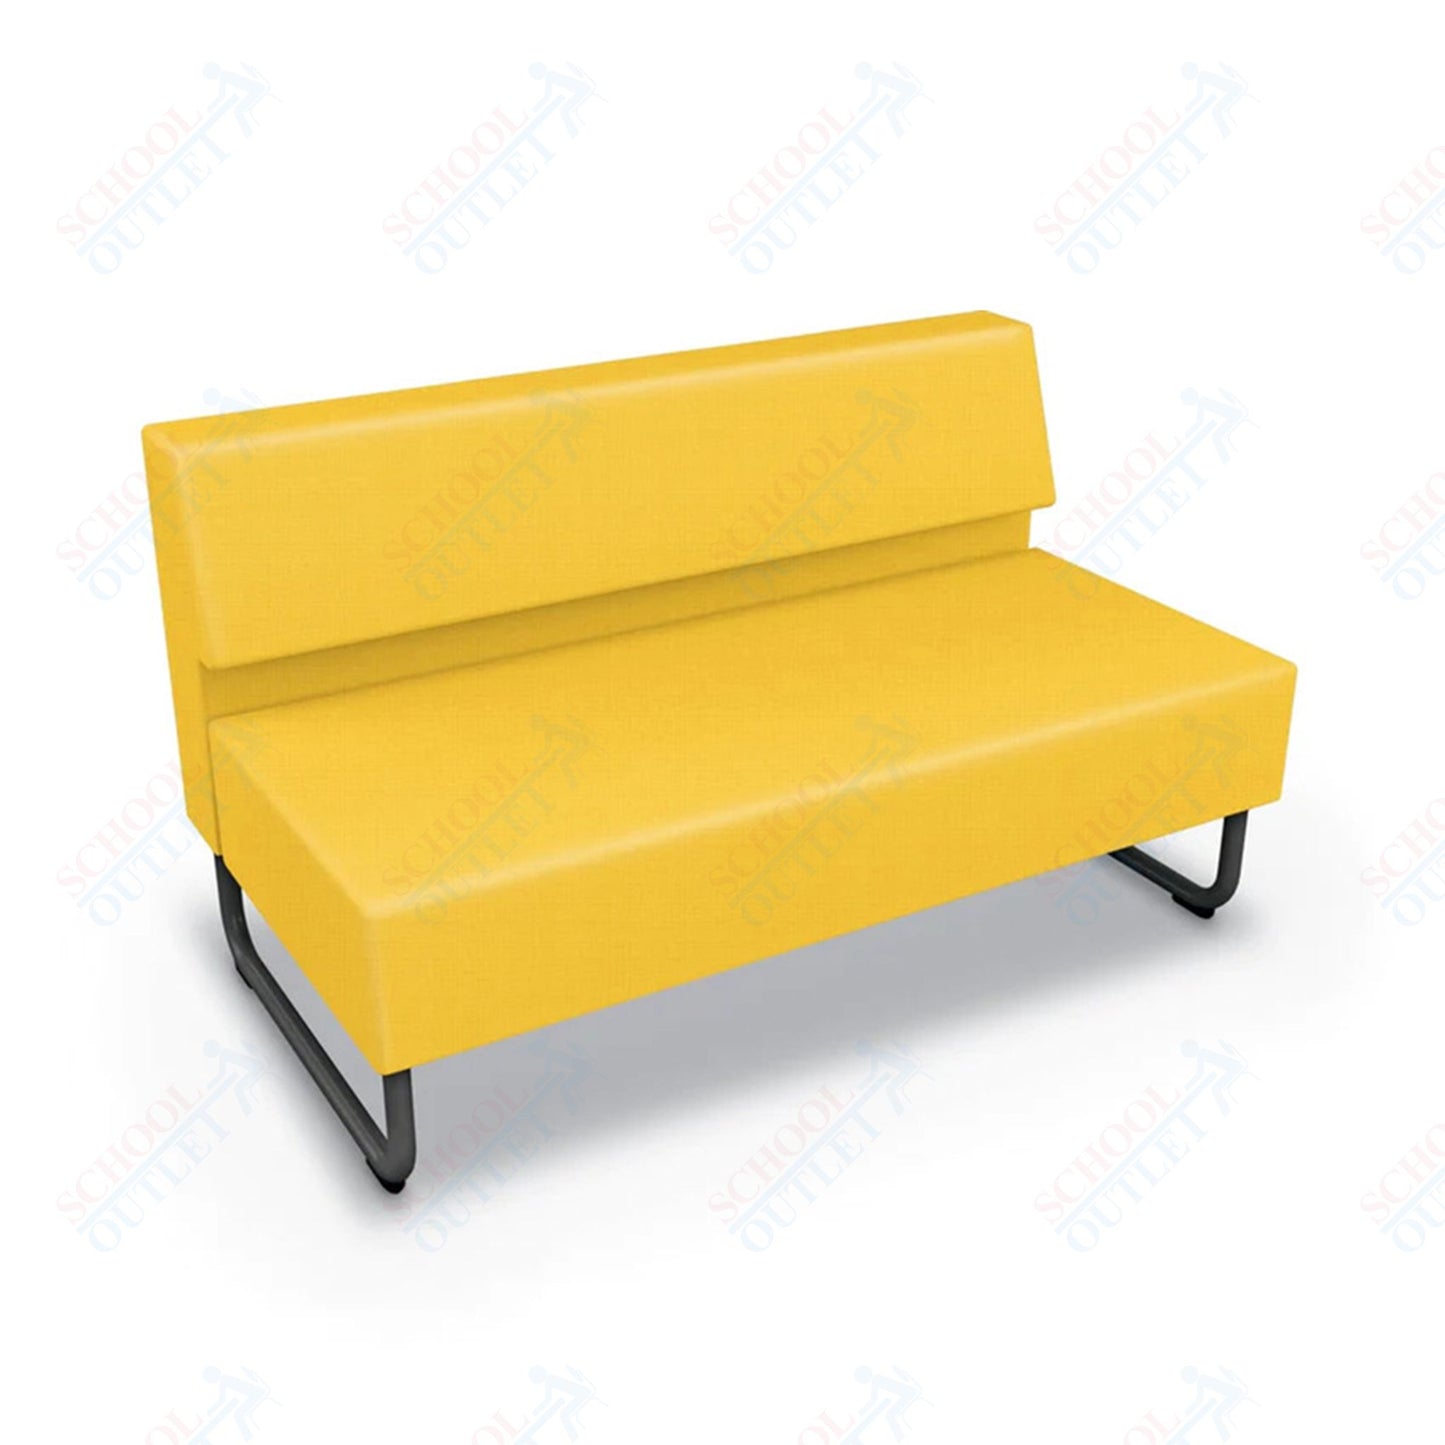 Mooreco Akt Soft Seating Lounge Loveseat - Armless - Grade 02 Fabric and Powder Coated Sled Legs